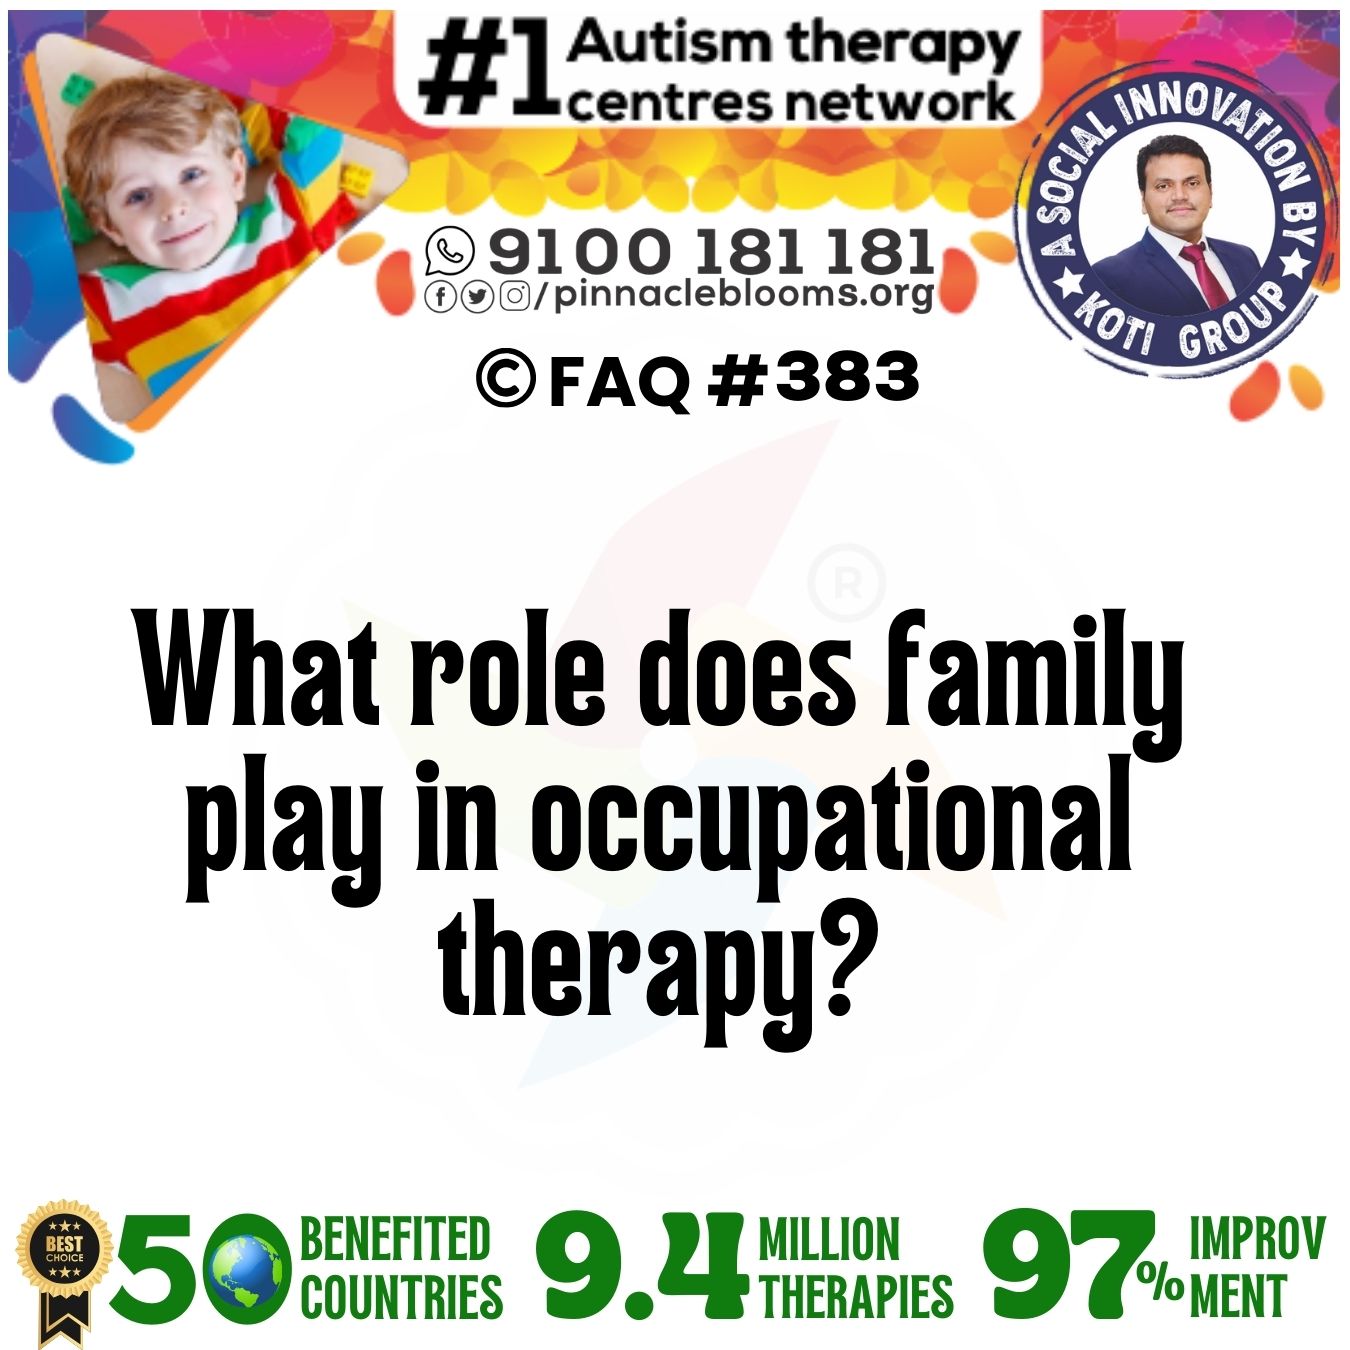 What role does family play in occupational therapy?